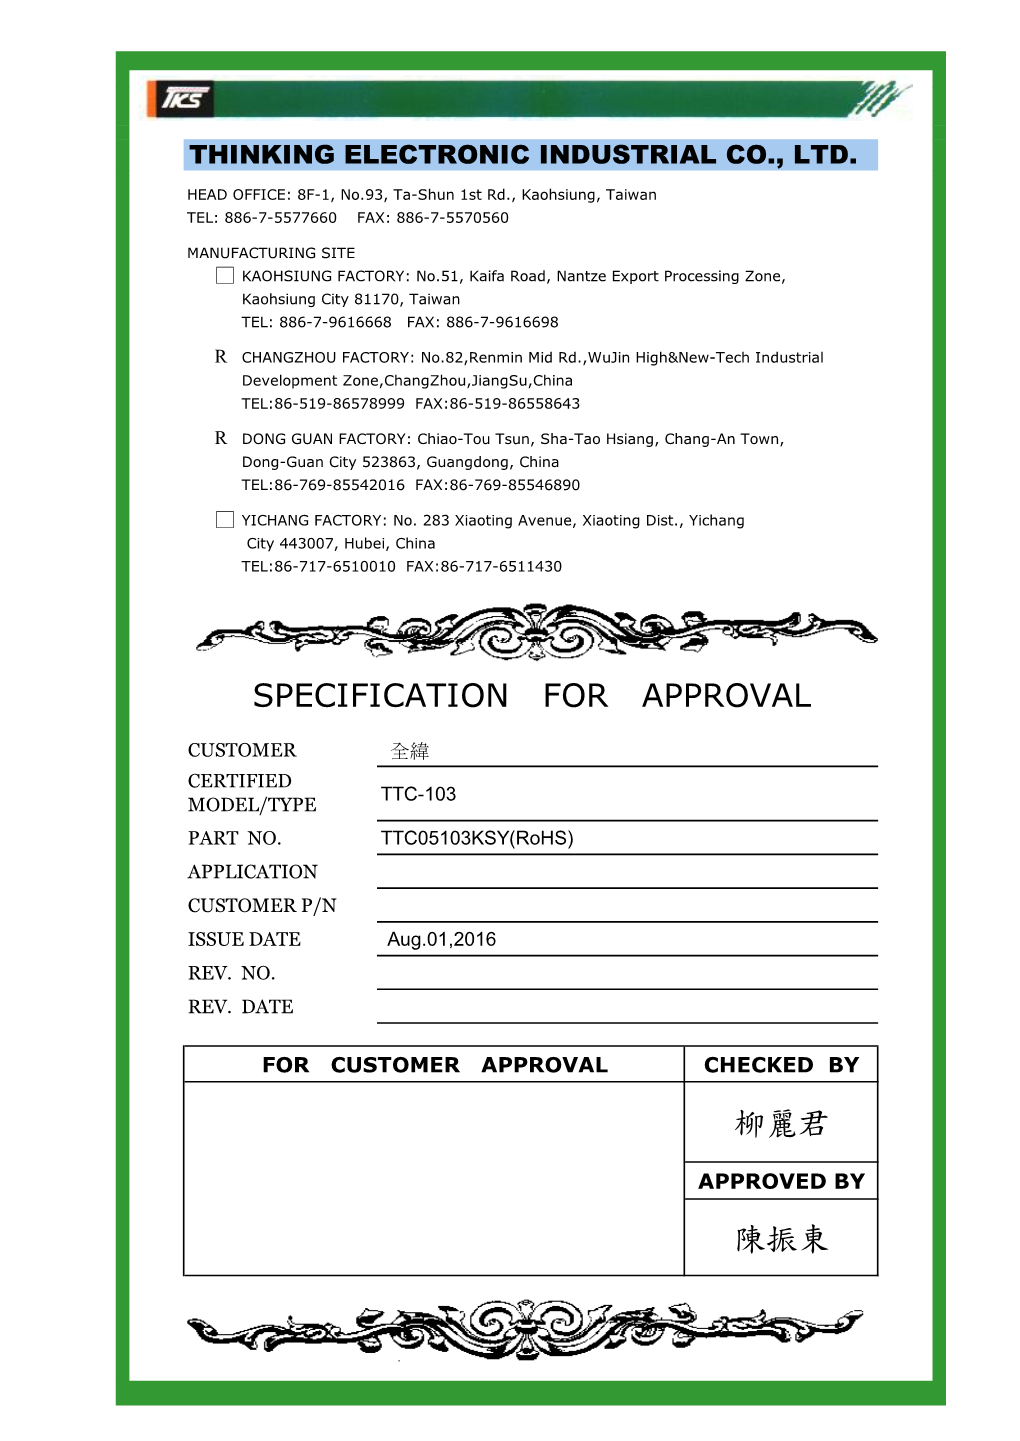 Specification for Approval 柳麗君